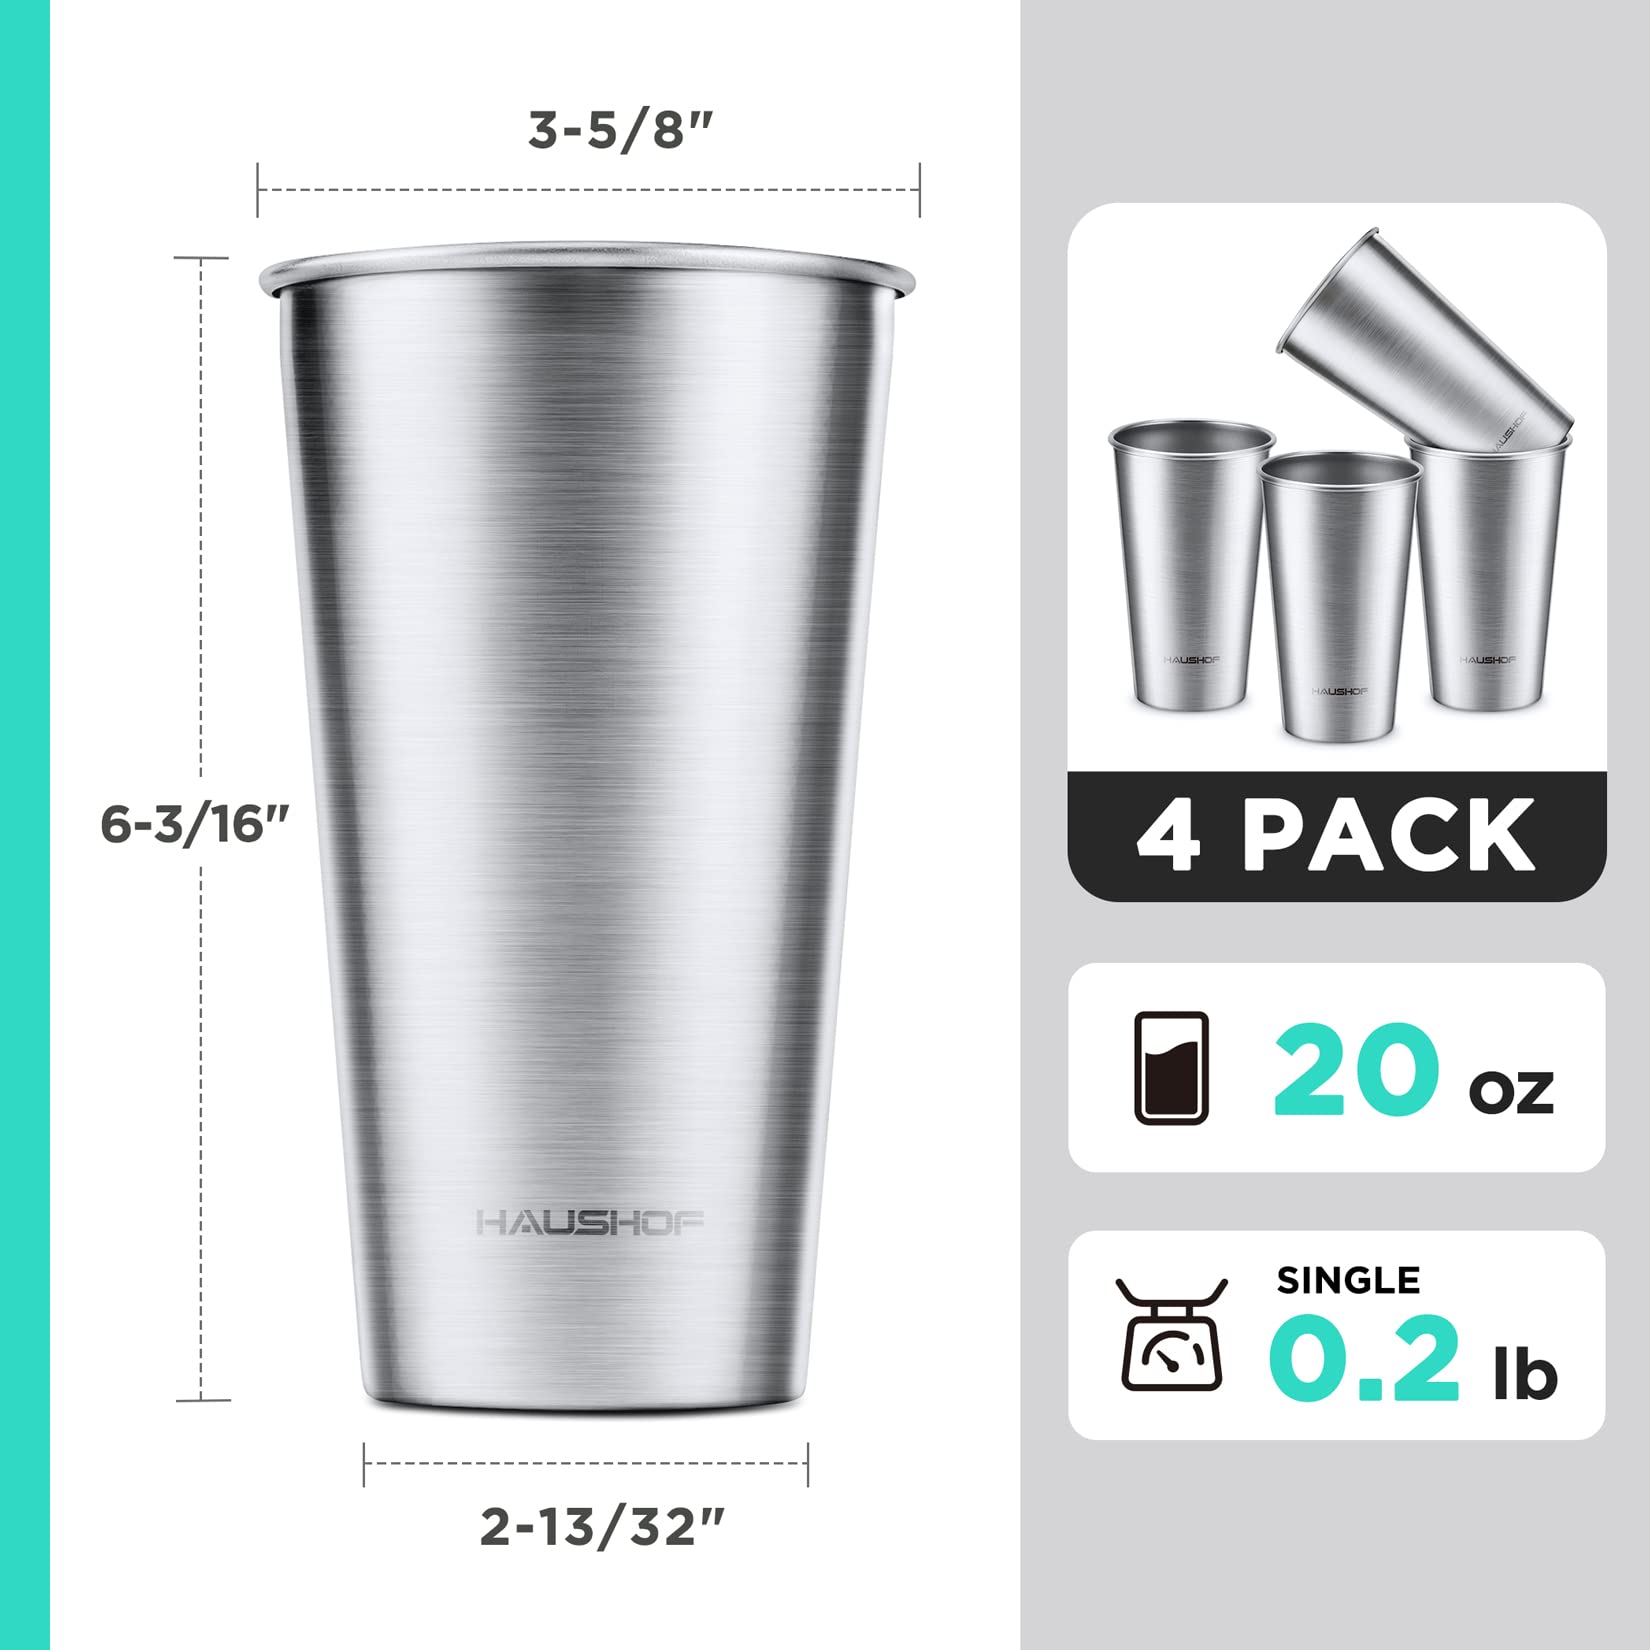 HAUSHOF Pint Cup, 20 oz Stainless Steel Cups, Stackable Metal Drinking Cups, Stacking Beer Pint Cups for Home, Party, Camping, Outdoor, Unbreakable, 4 Pack